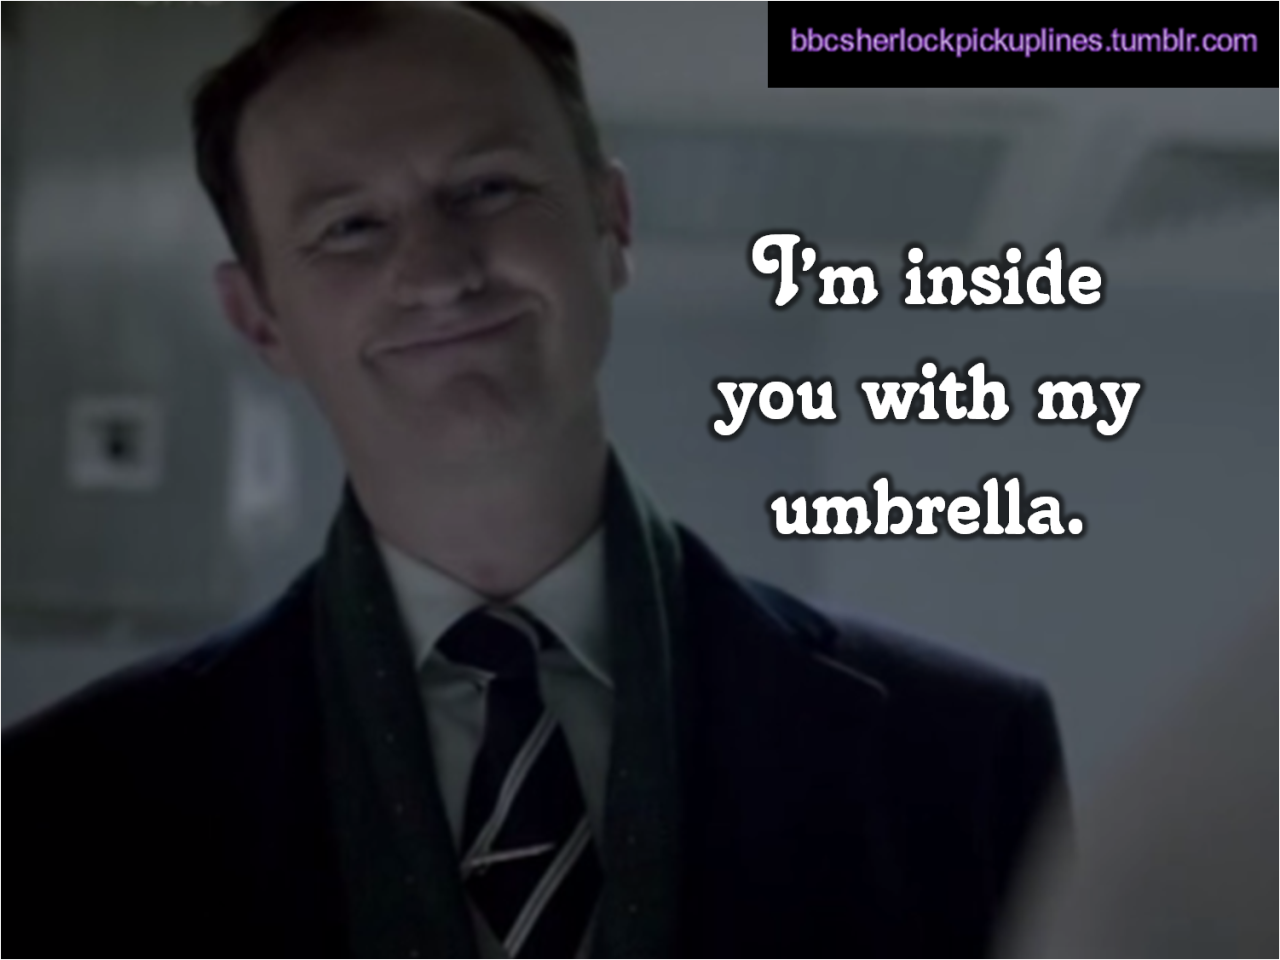 The best of Mycroft&rsquo;s umbrella, from BBC Sherlock pick-up lines. Mycroft&rsquo;s